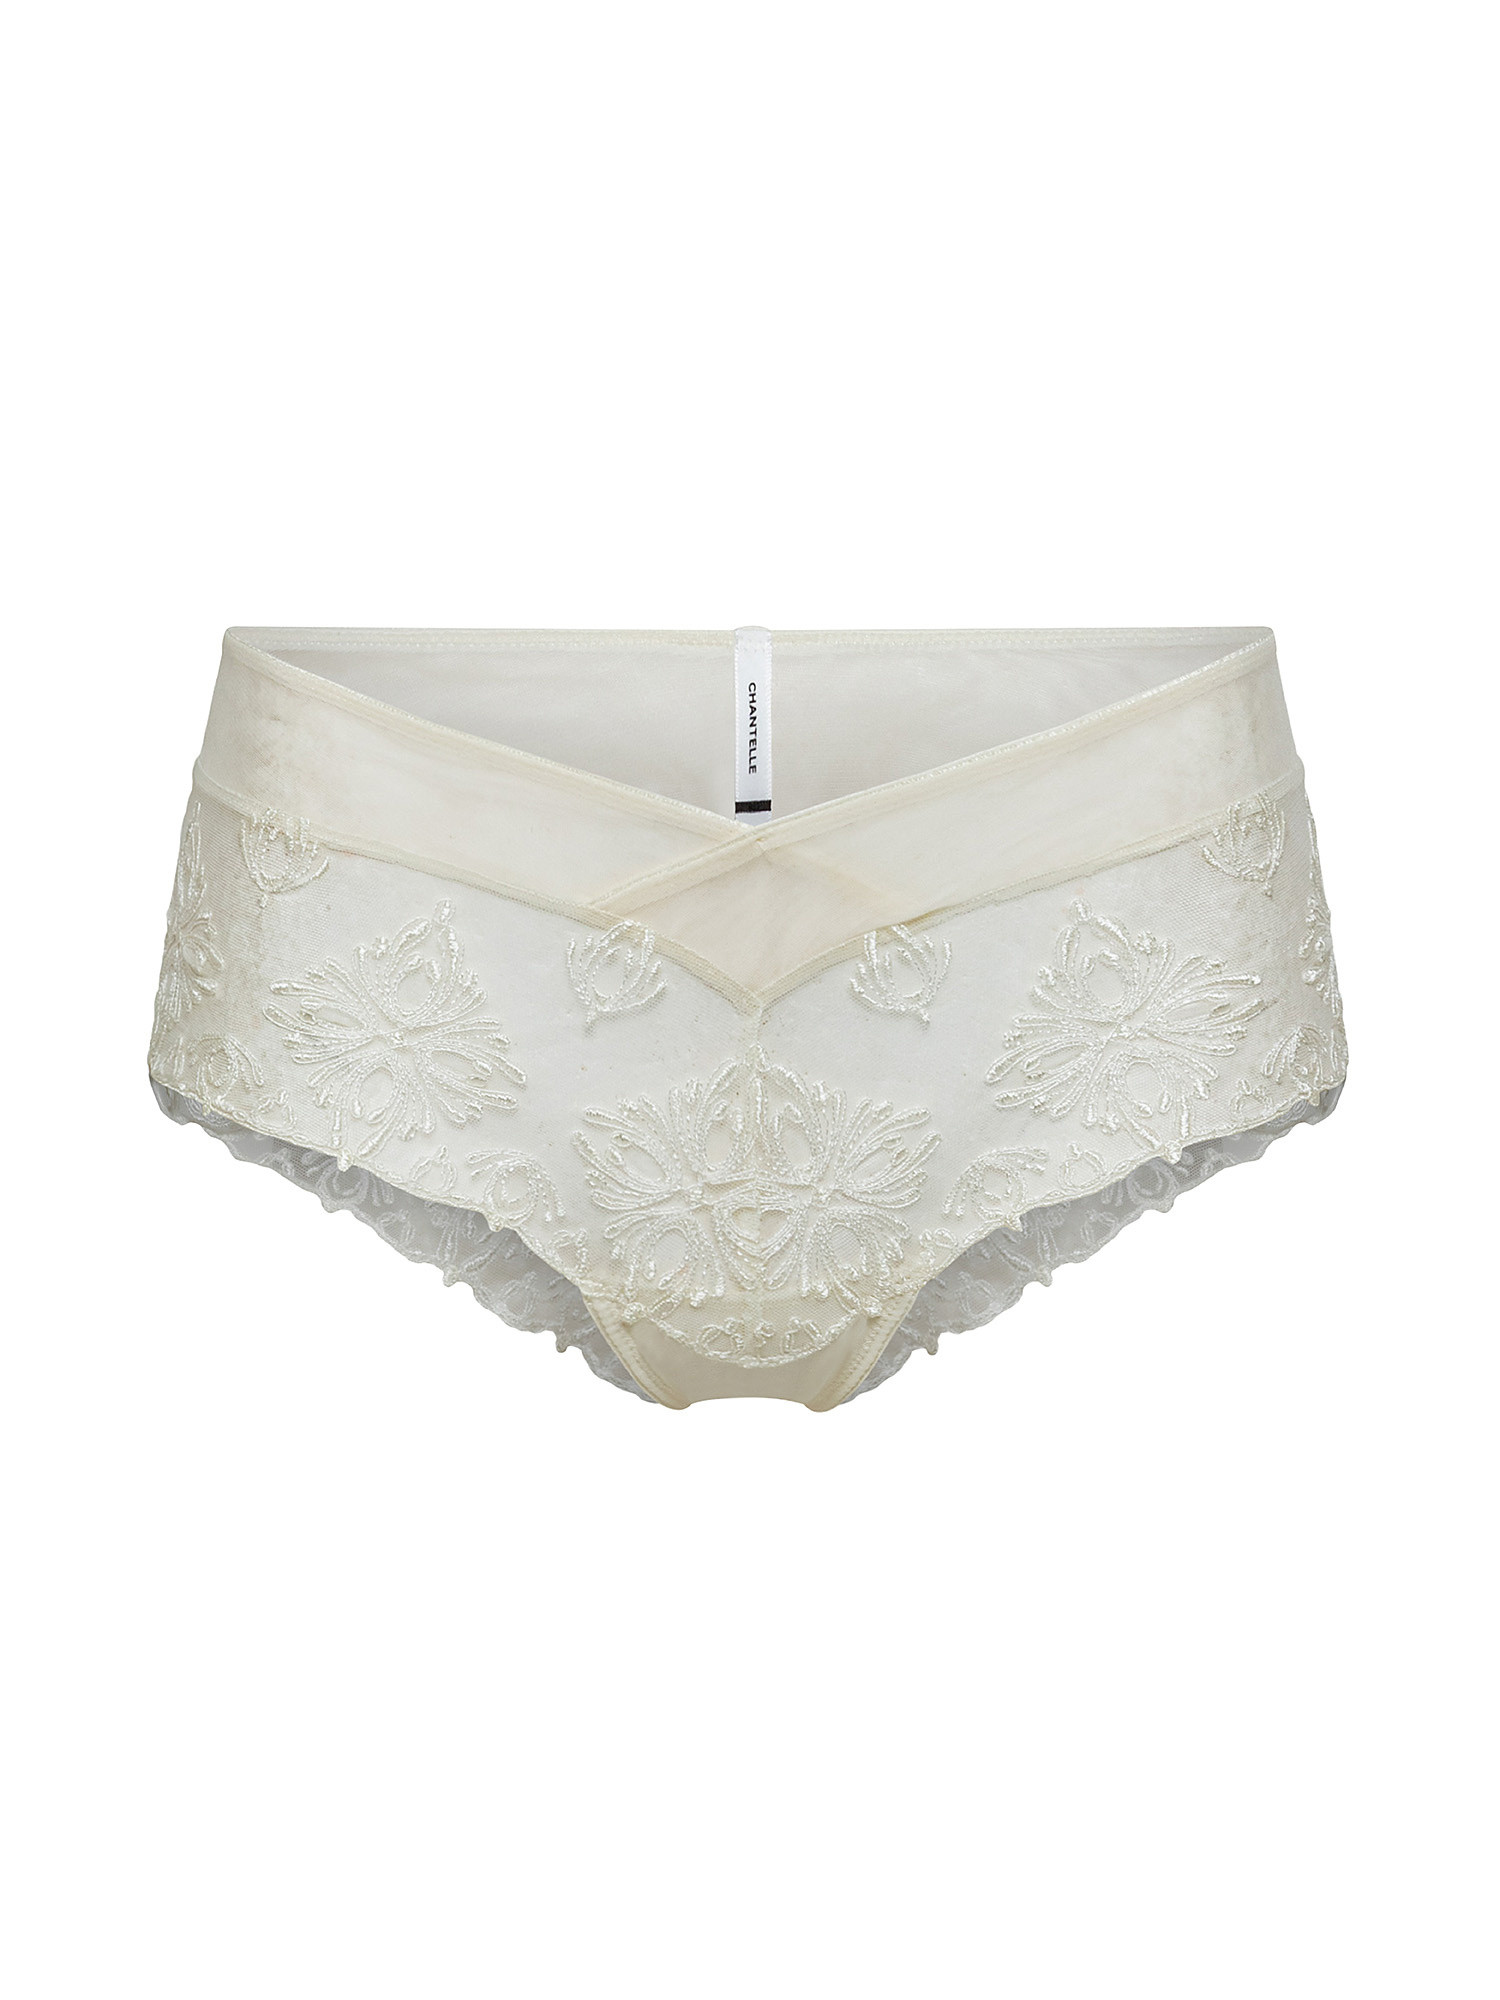 Embroidered briefs, White Ivory, large image number 0